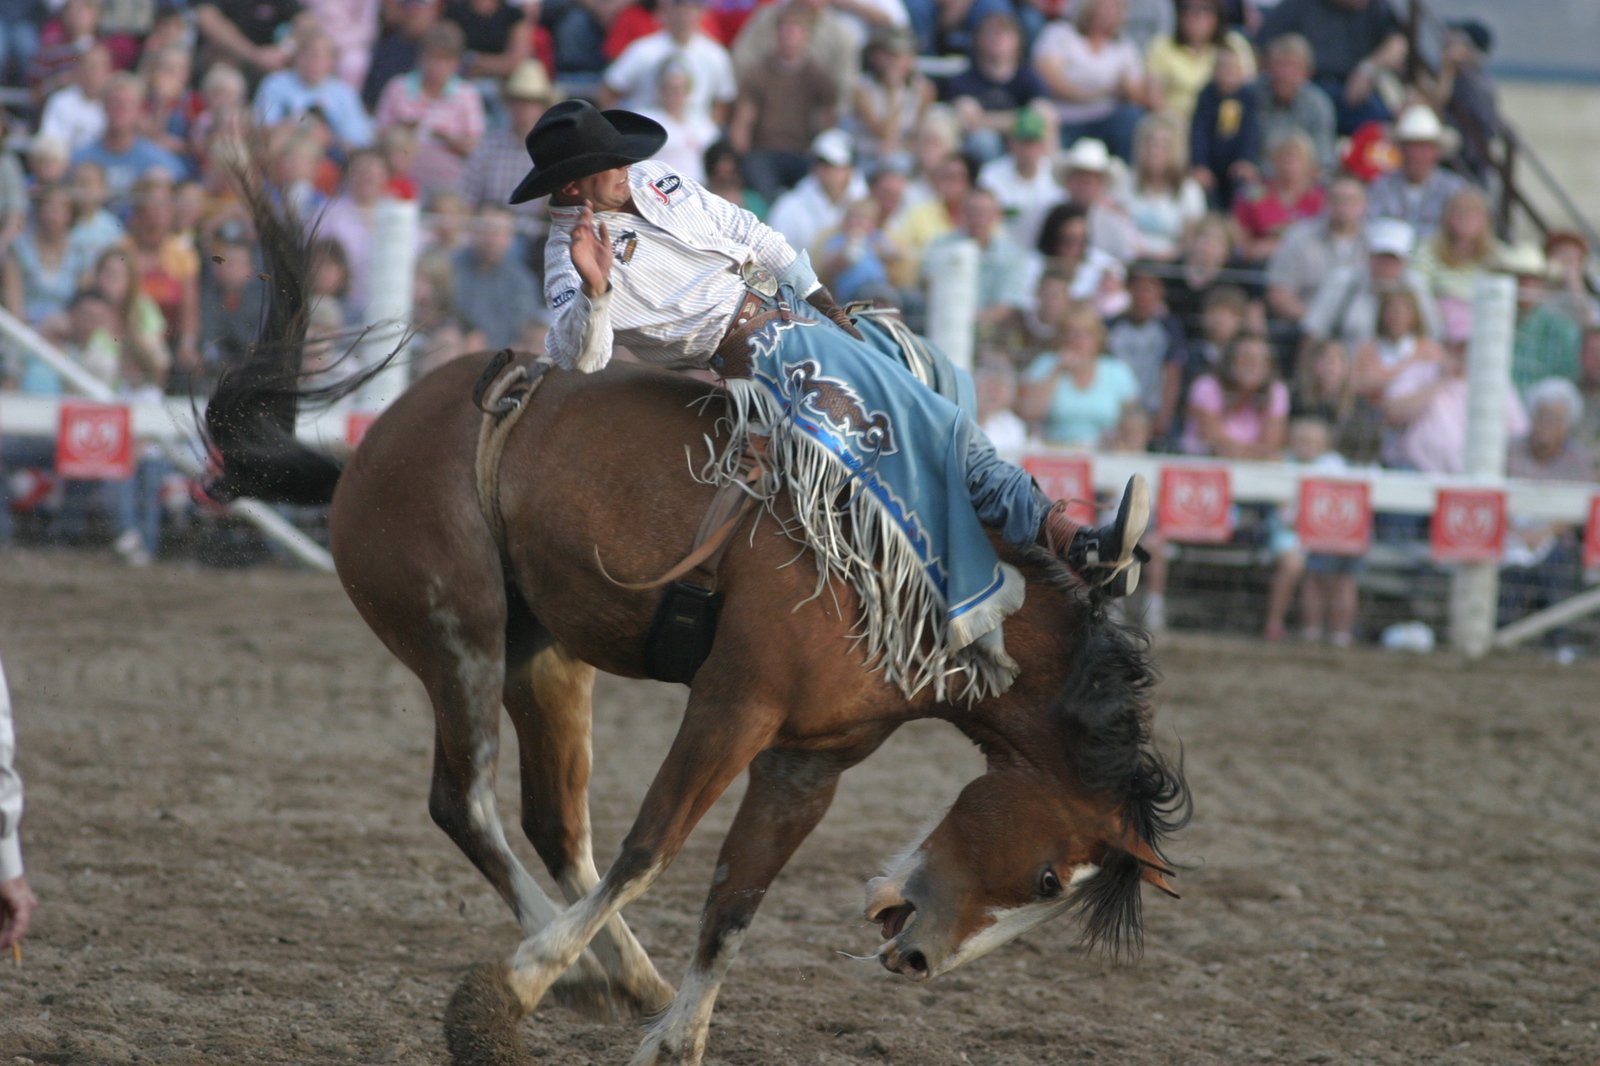 a man on top of a horse at an arena